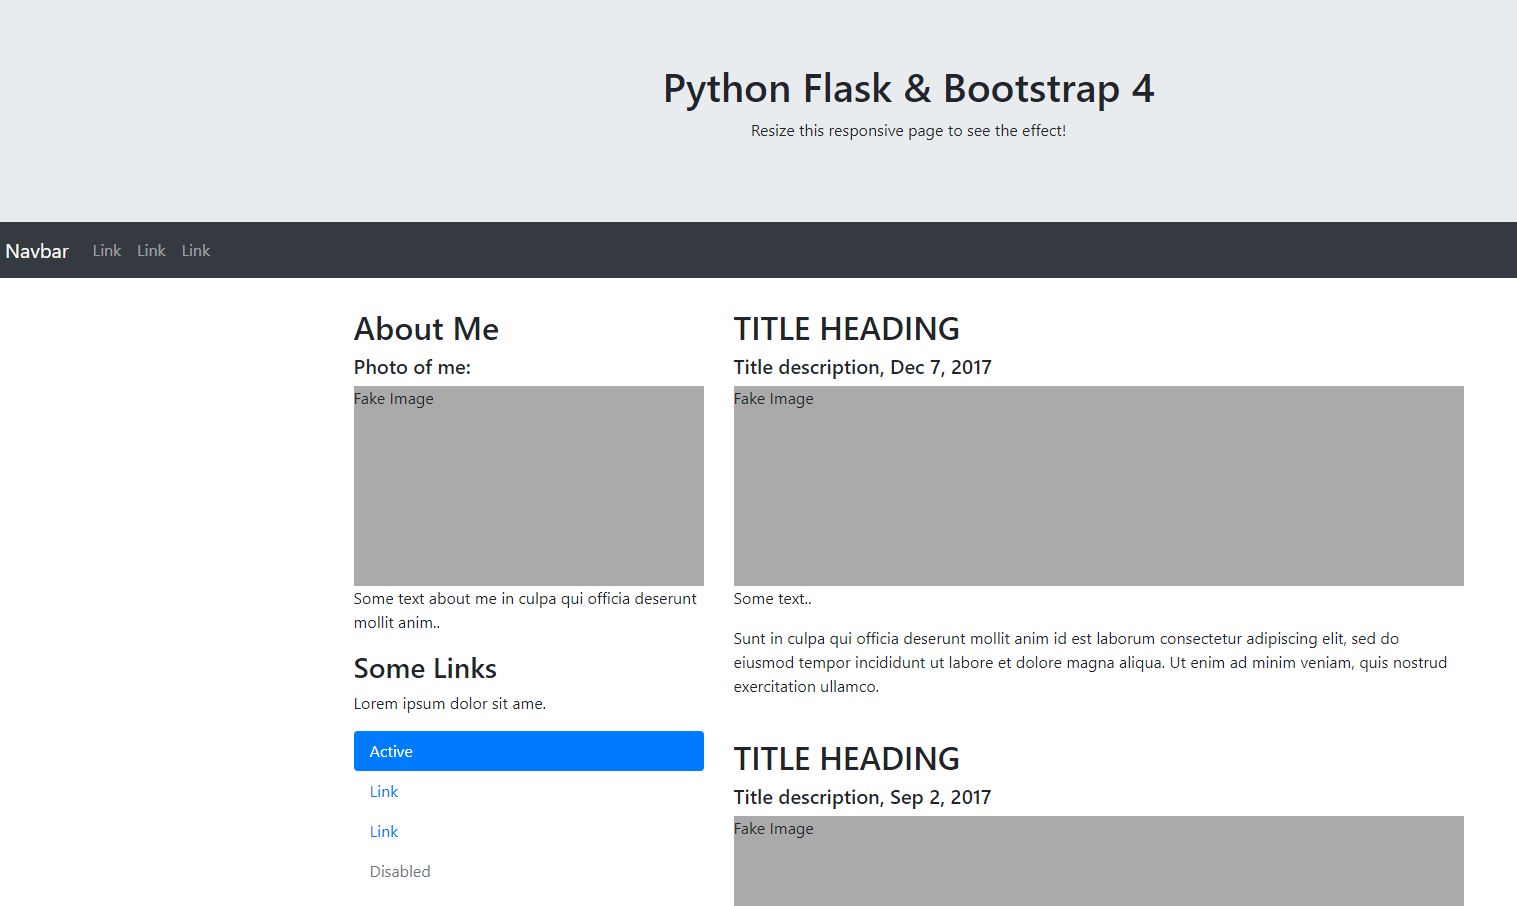 Bootstrap 4 for Python Flask